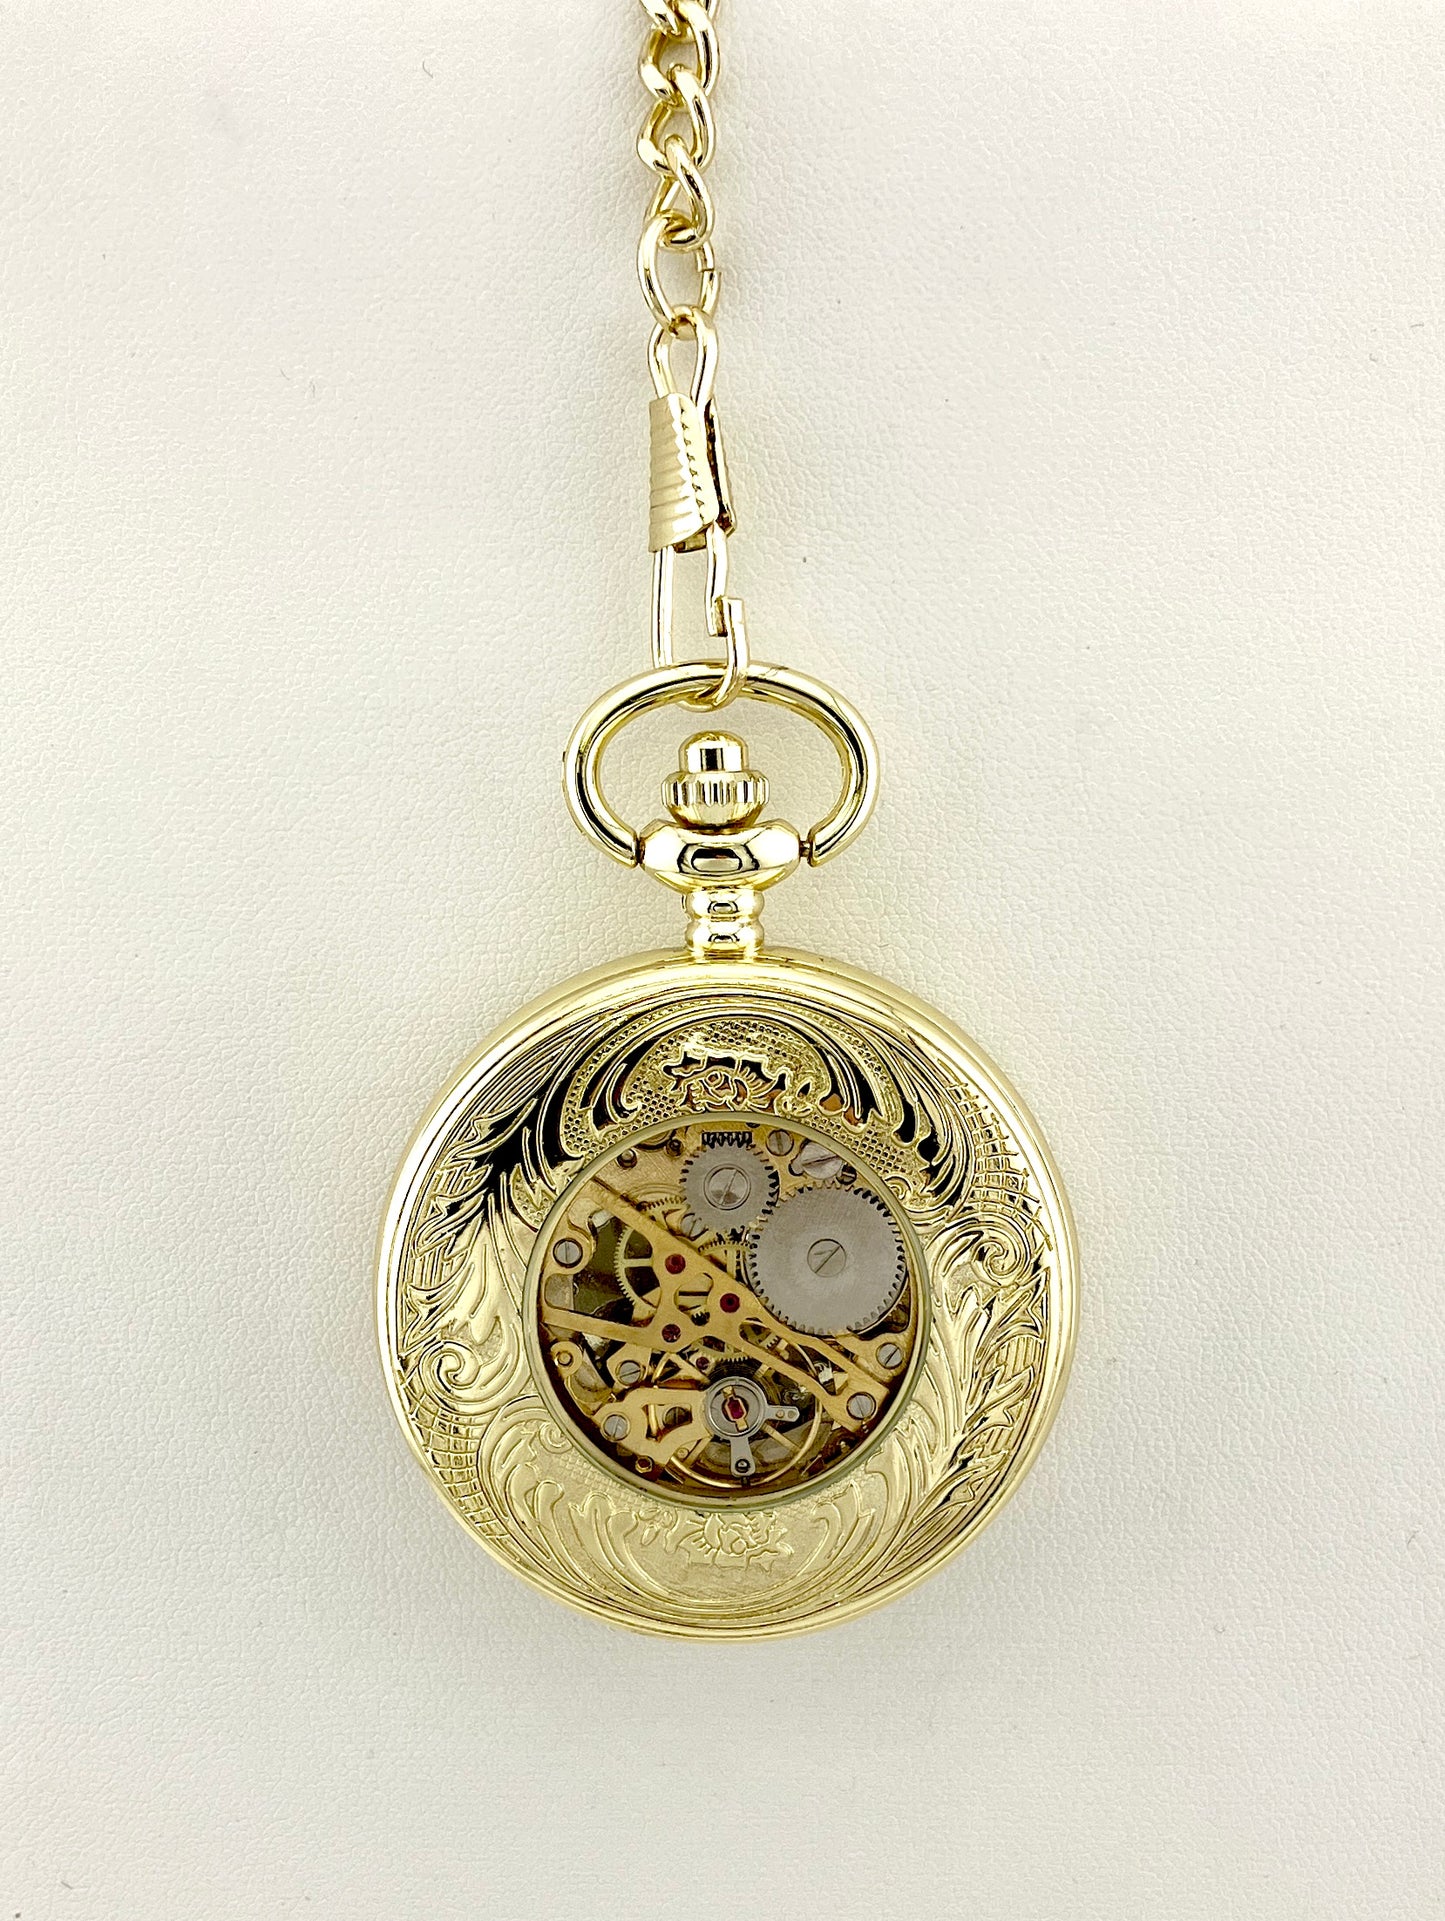 Winding Pocket Watch Non-Vintage Gold Coloured Metal with Gears Pattern, Hinged Cover